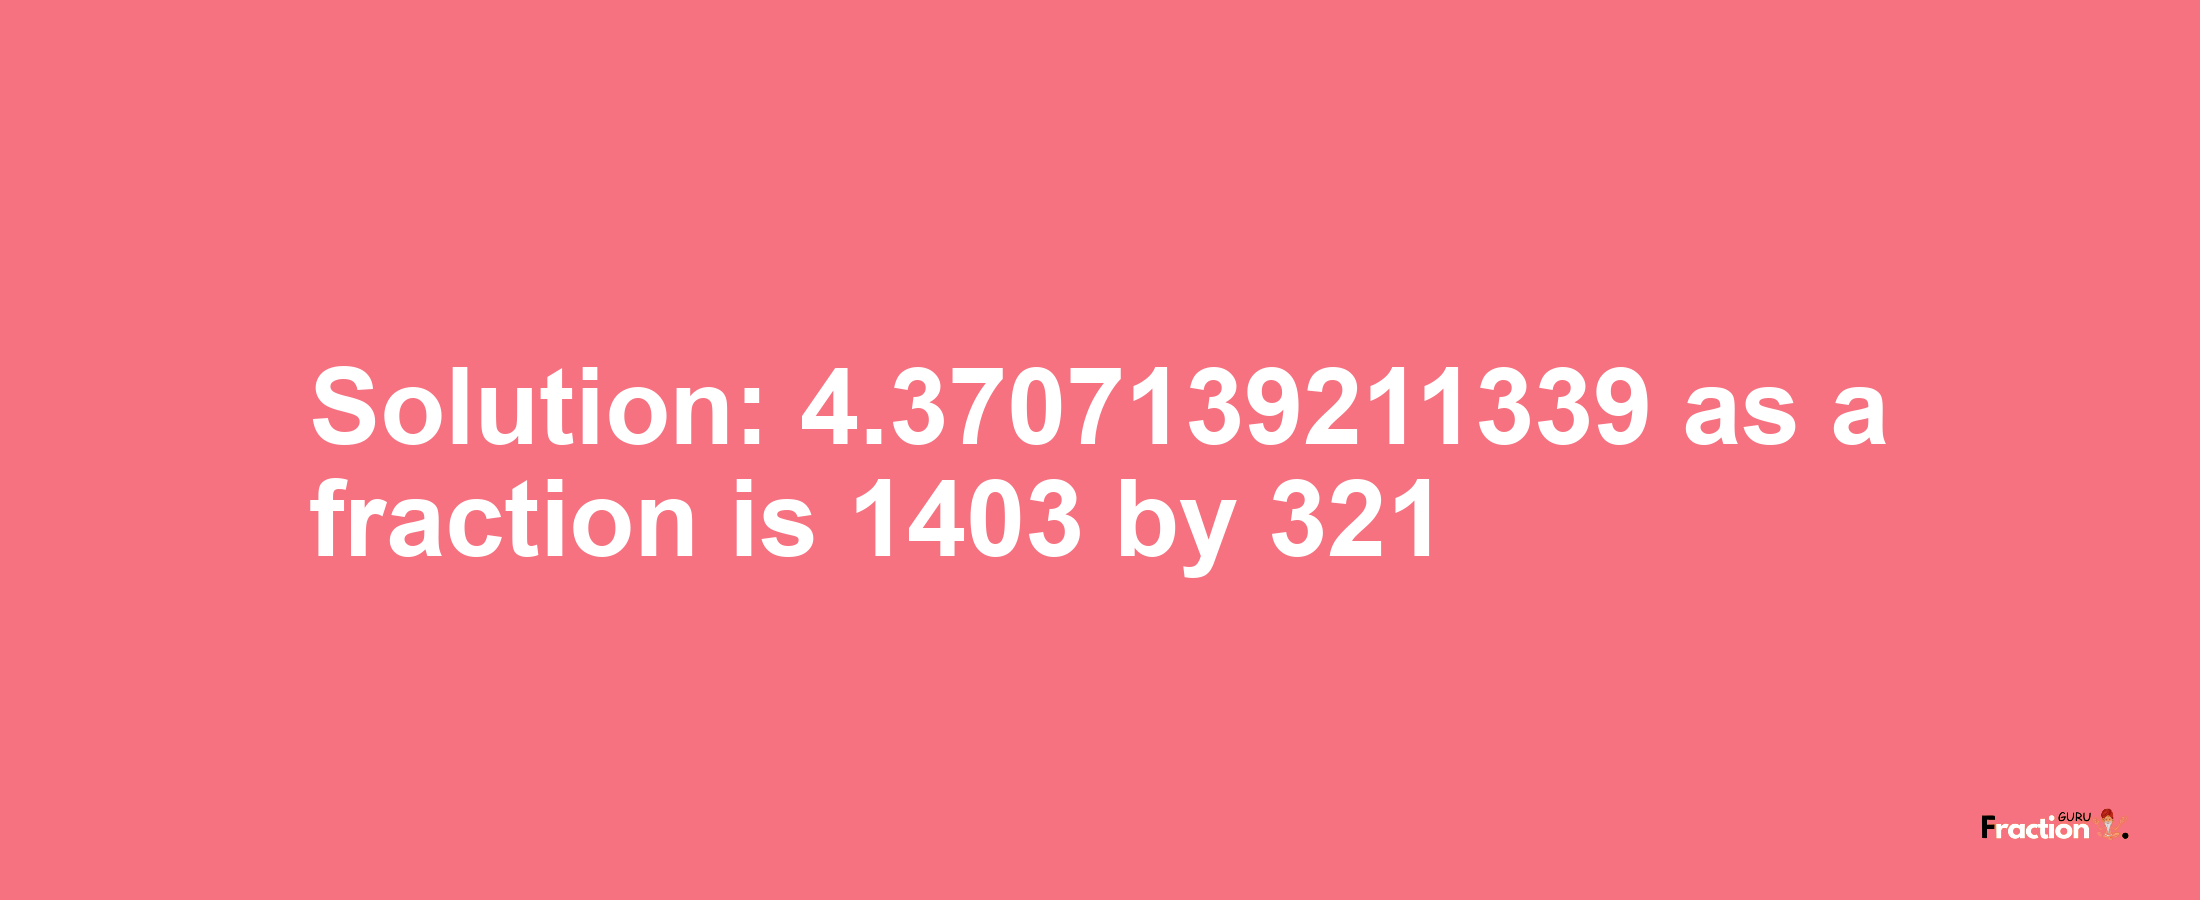 Solution:4.3707139211339 as a fraction is 1403/321